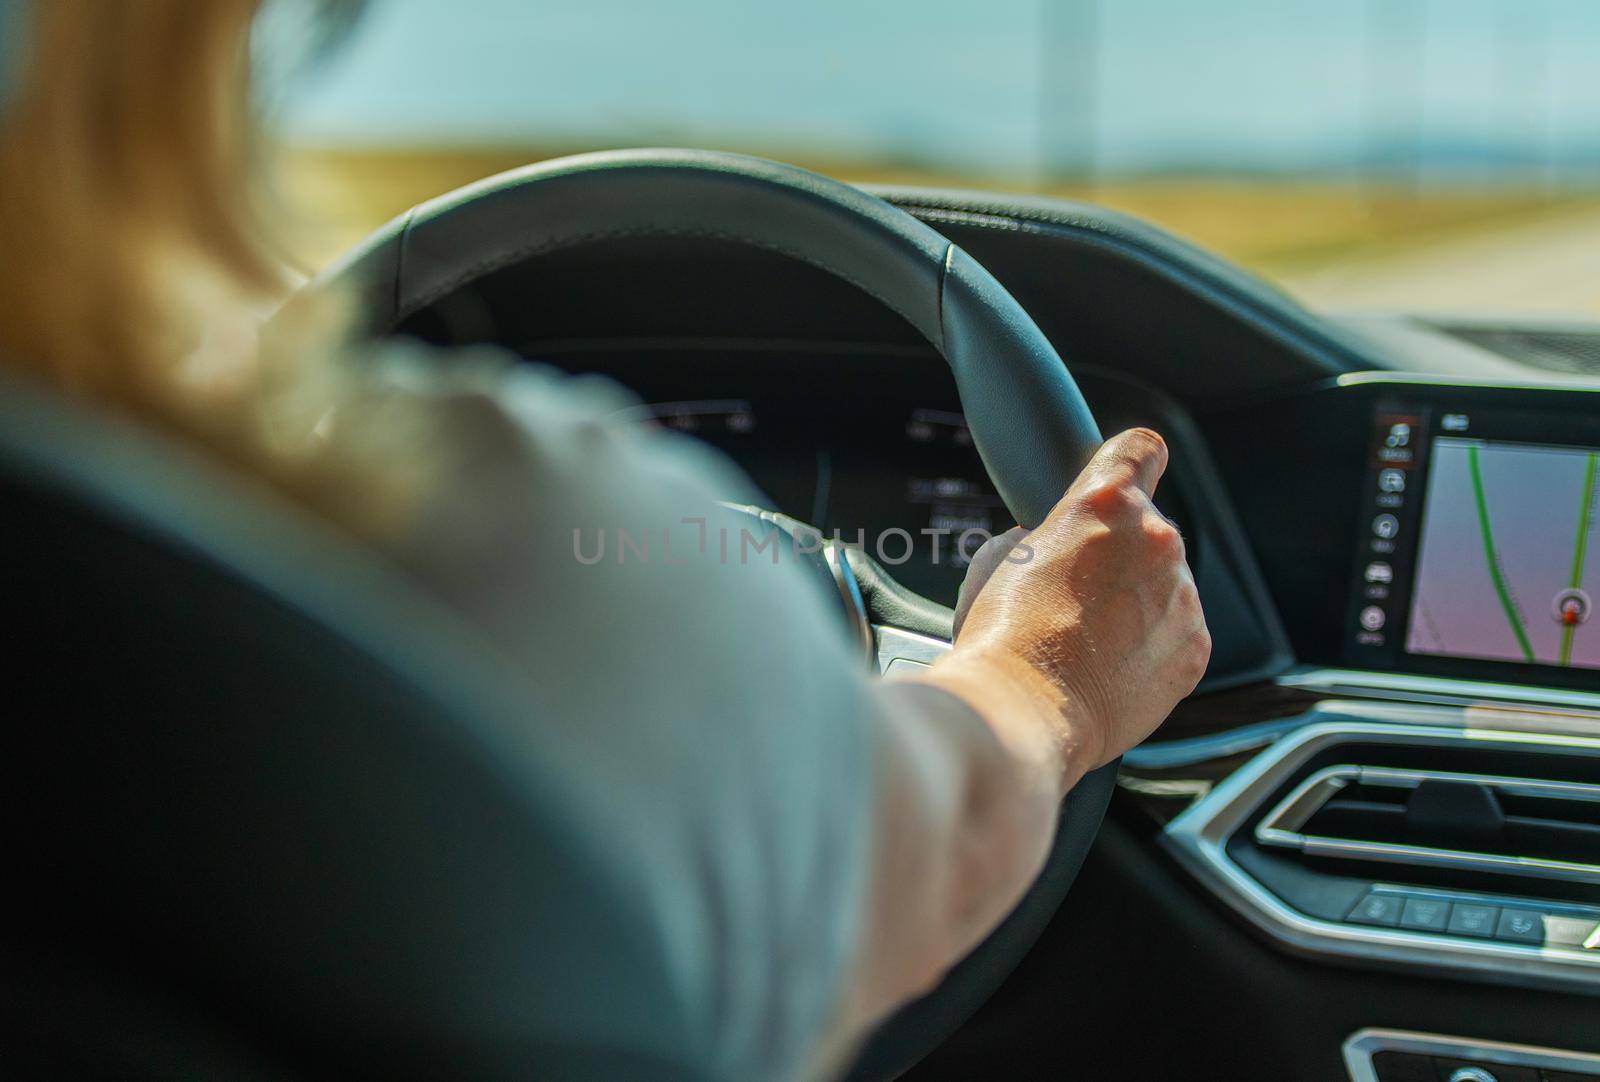 Woman Driver Behind the Wheel by welcomia